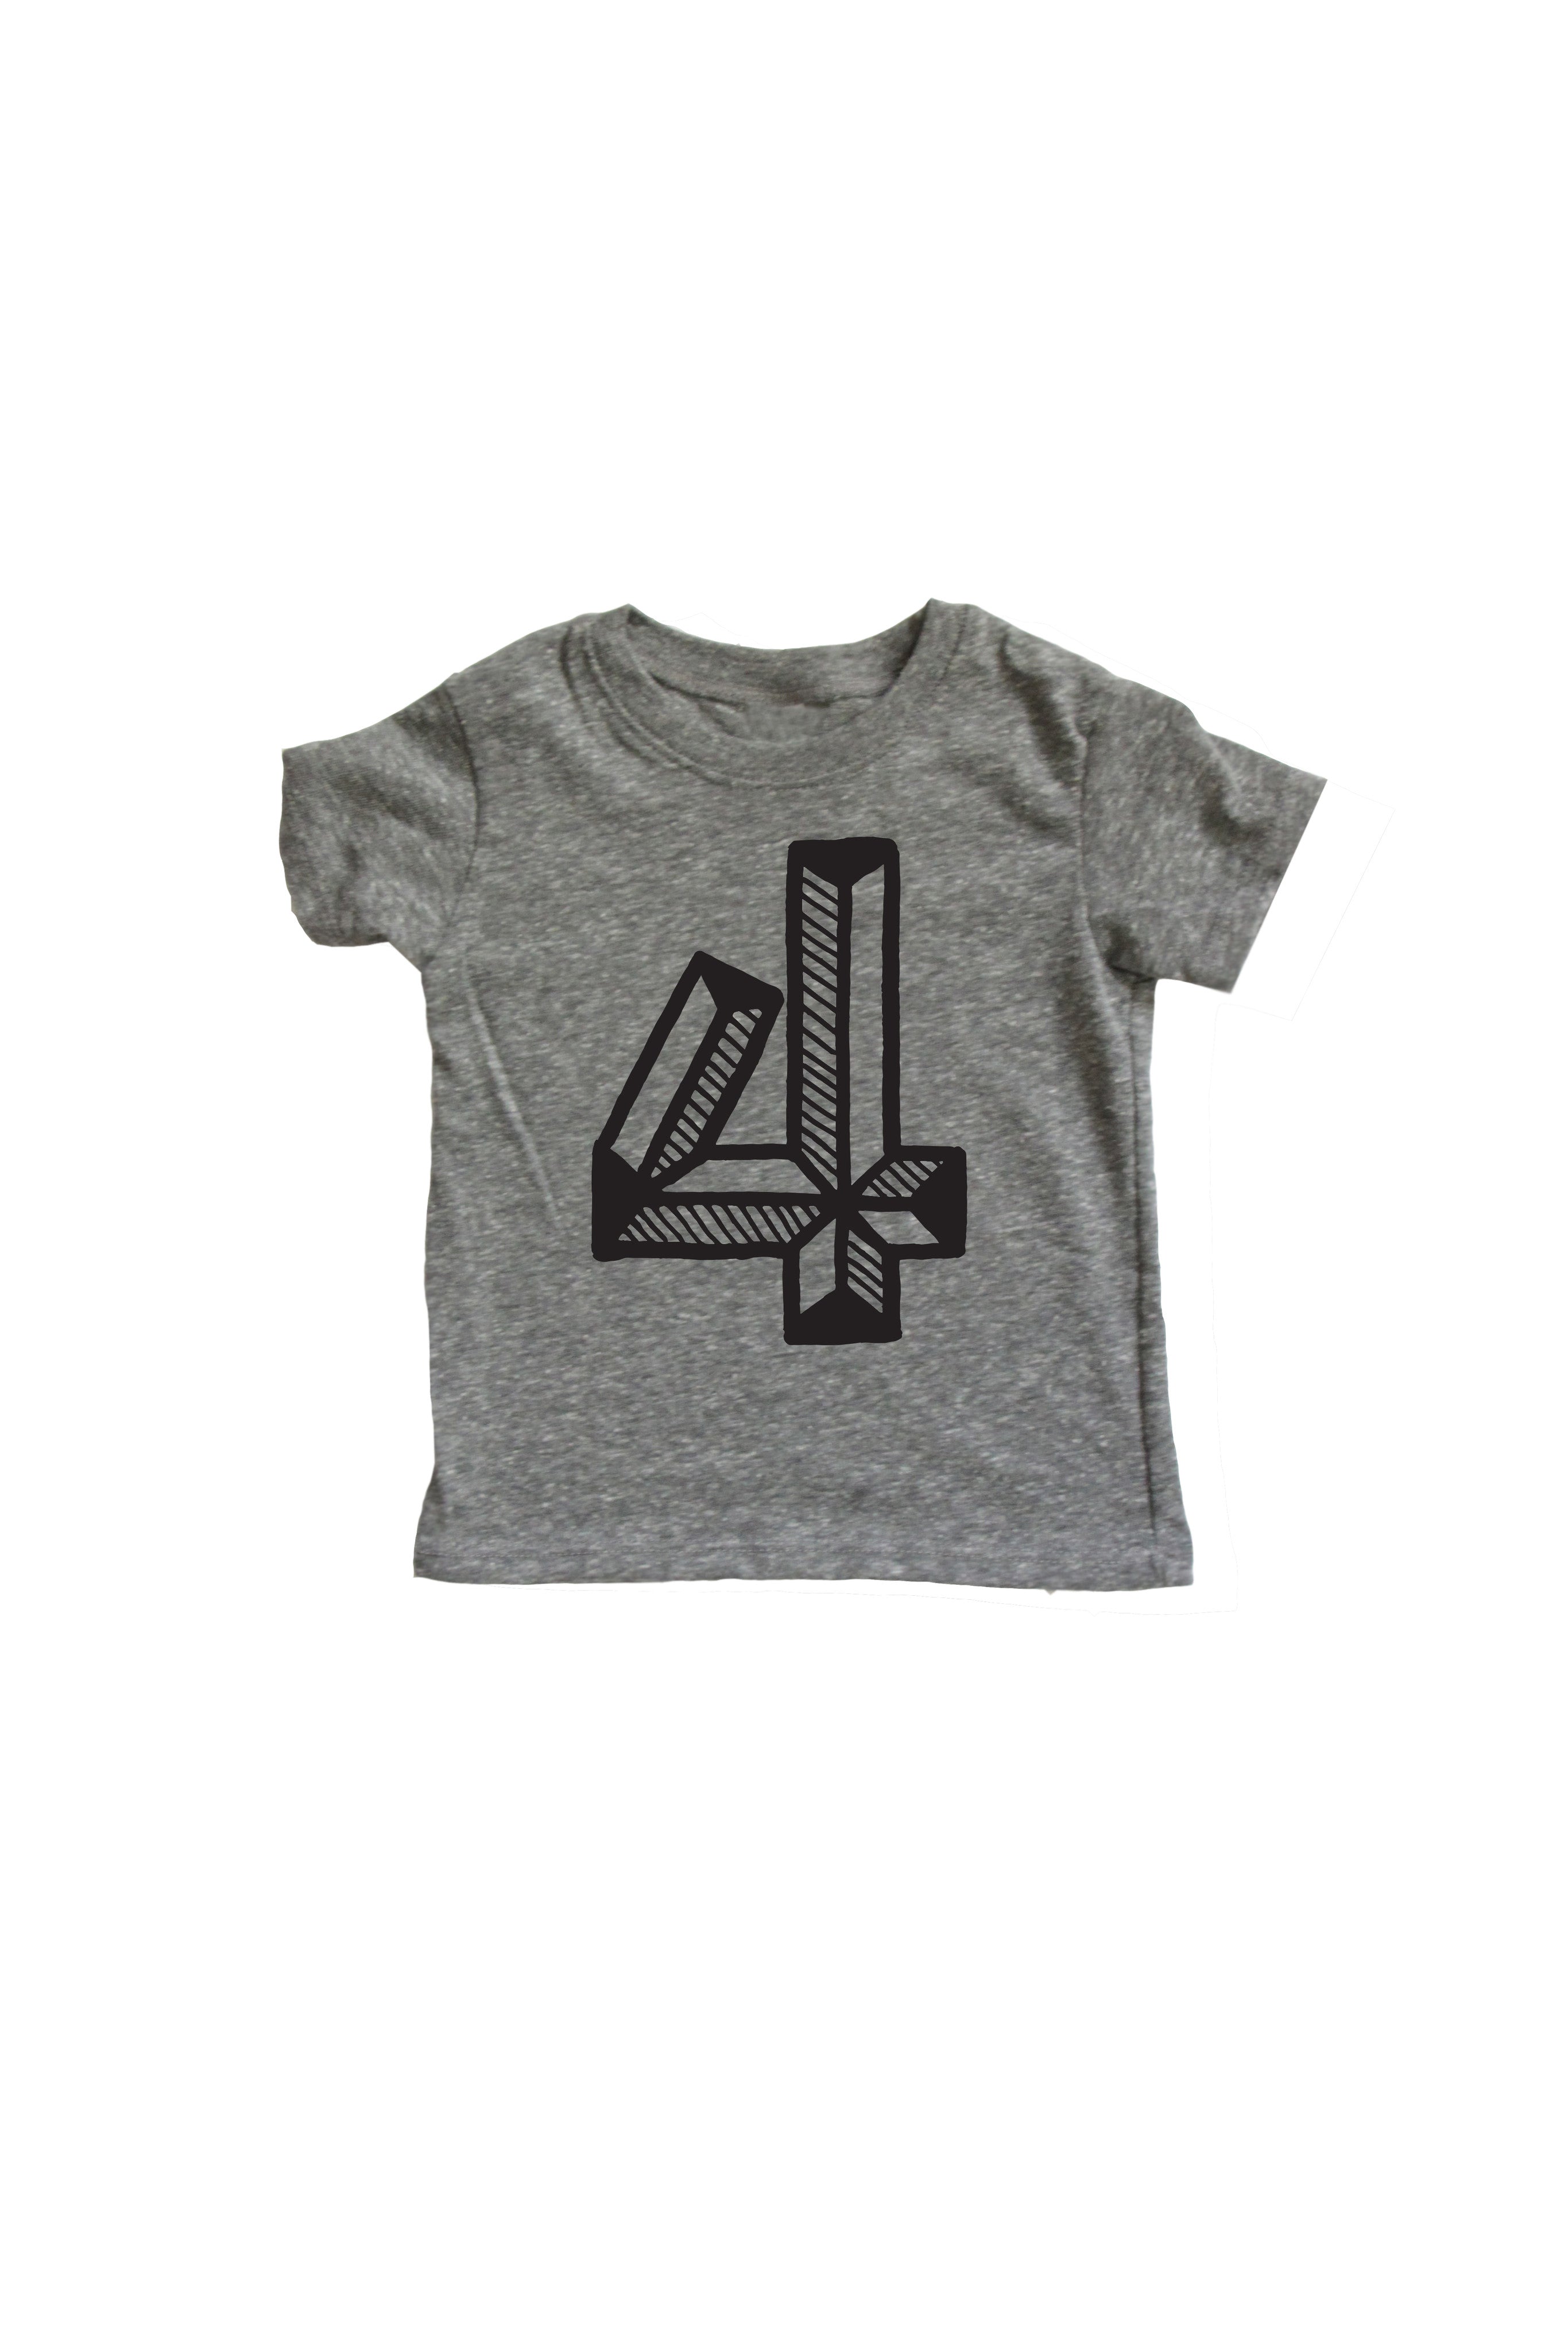 Number Four Tee